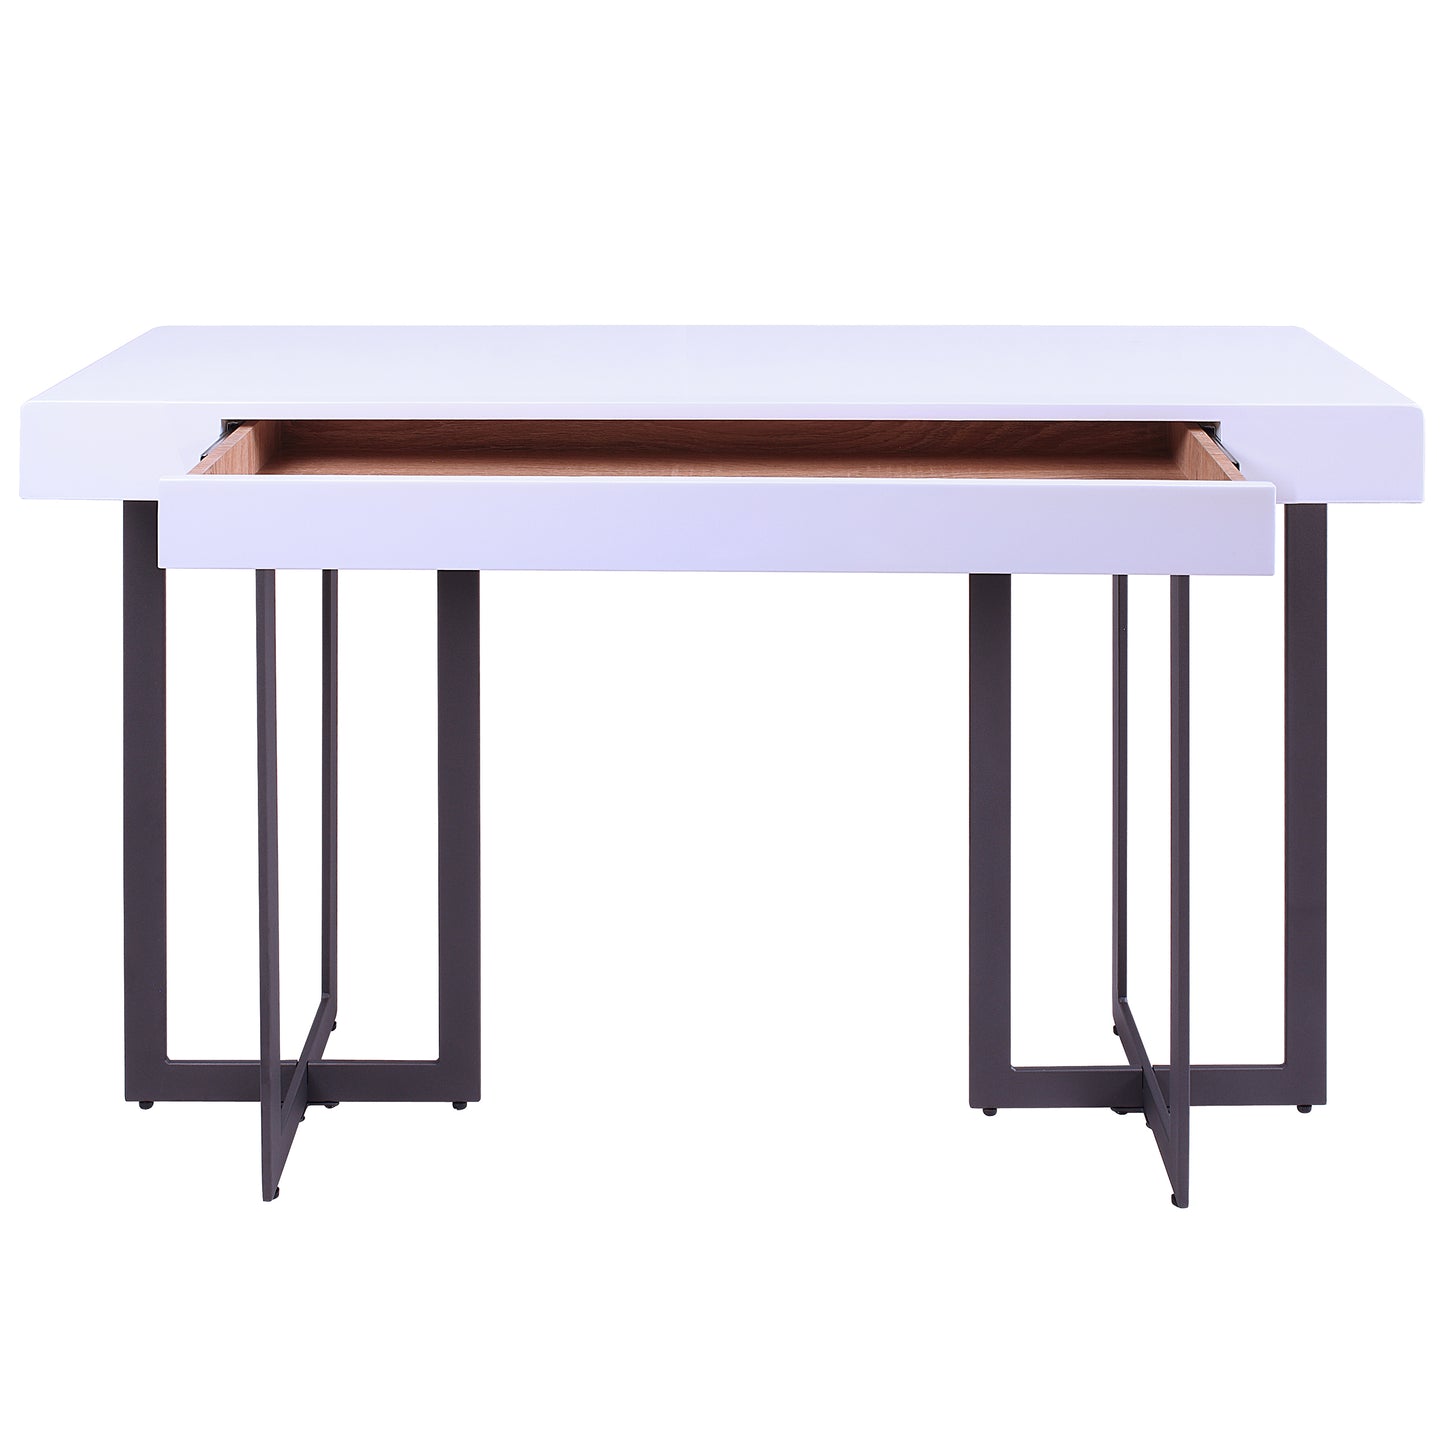 Front-facing console table only from a three-piece modern white high gloss and gunmetal storage coffee table set with hidden drawer open on a white background